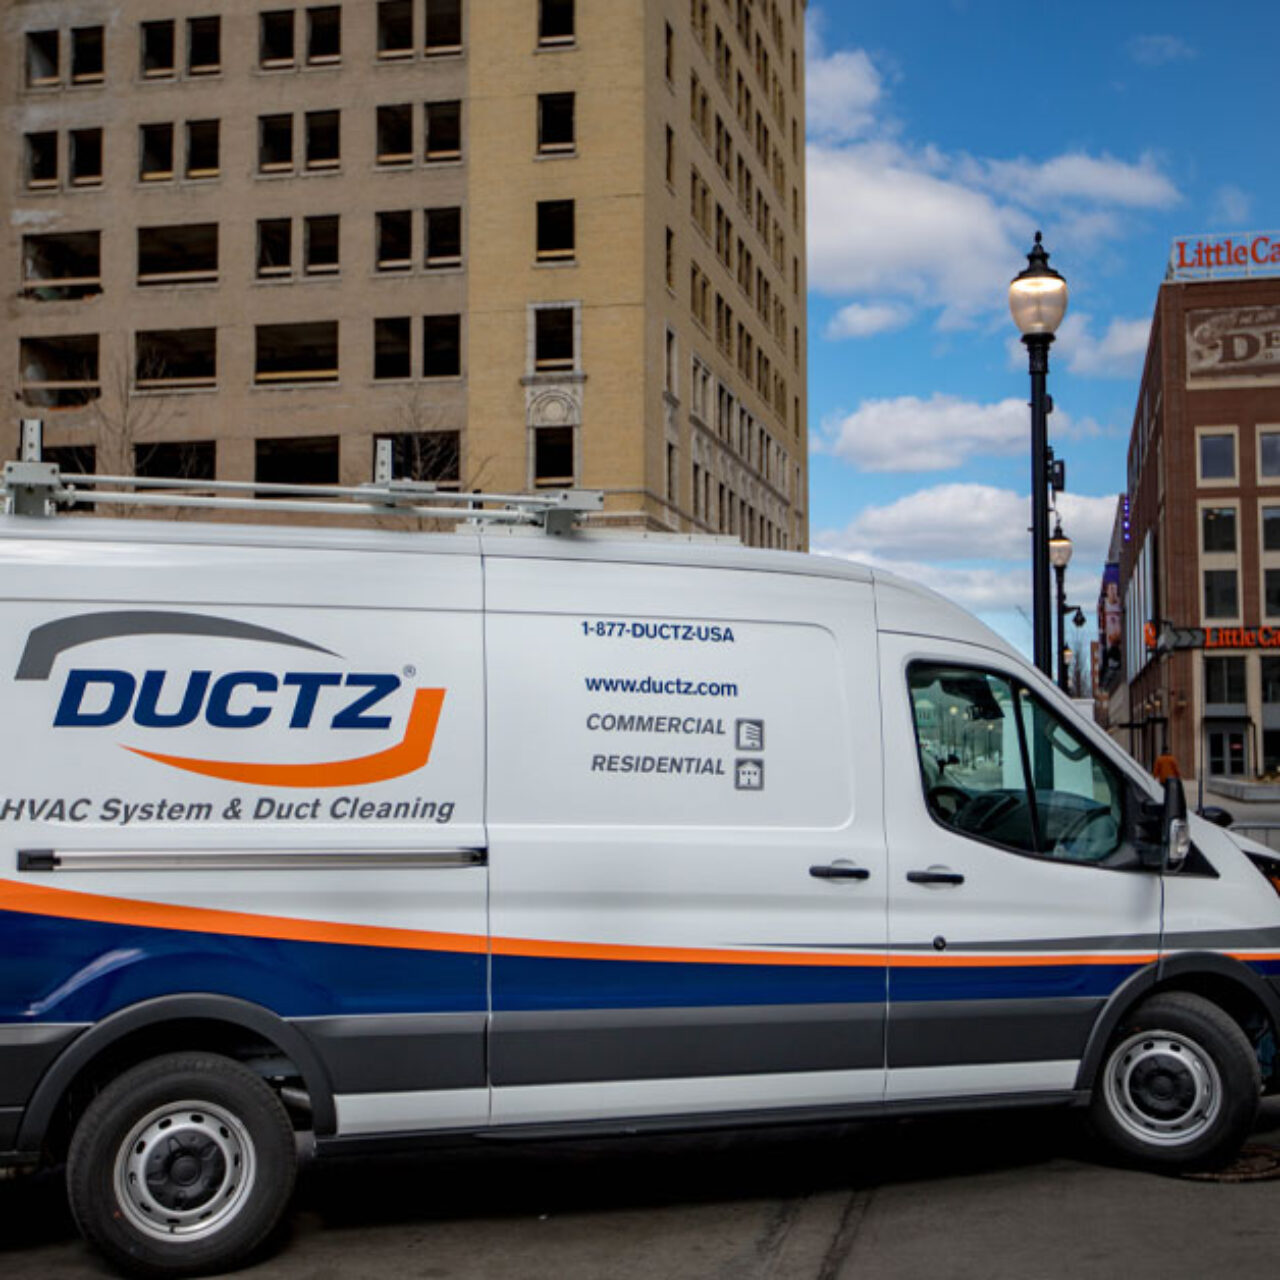 Raleigh Commercial Air Duct & Vent Cleaning DUCTZ of Raleigh